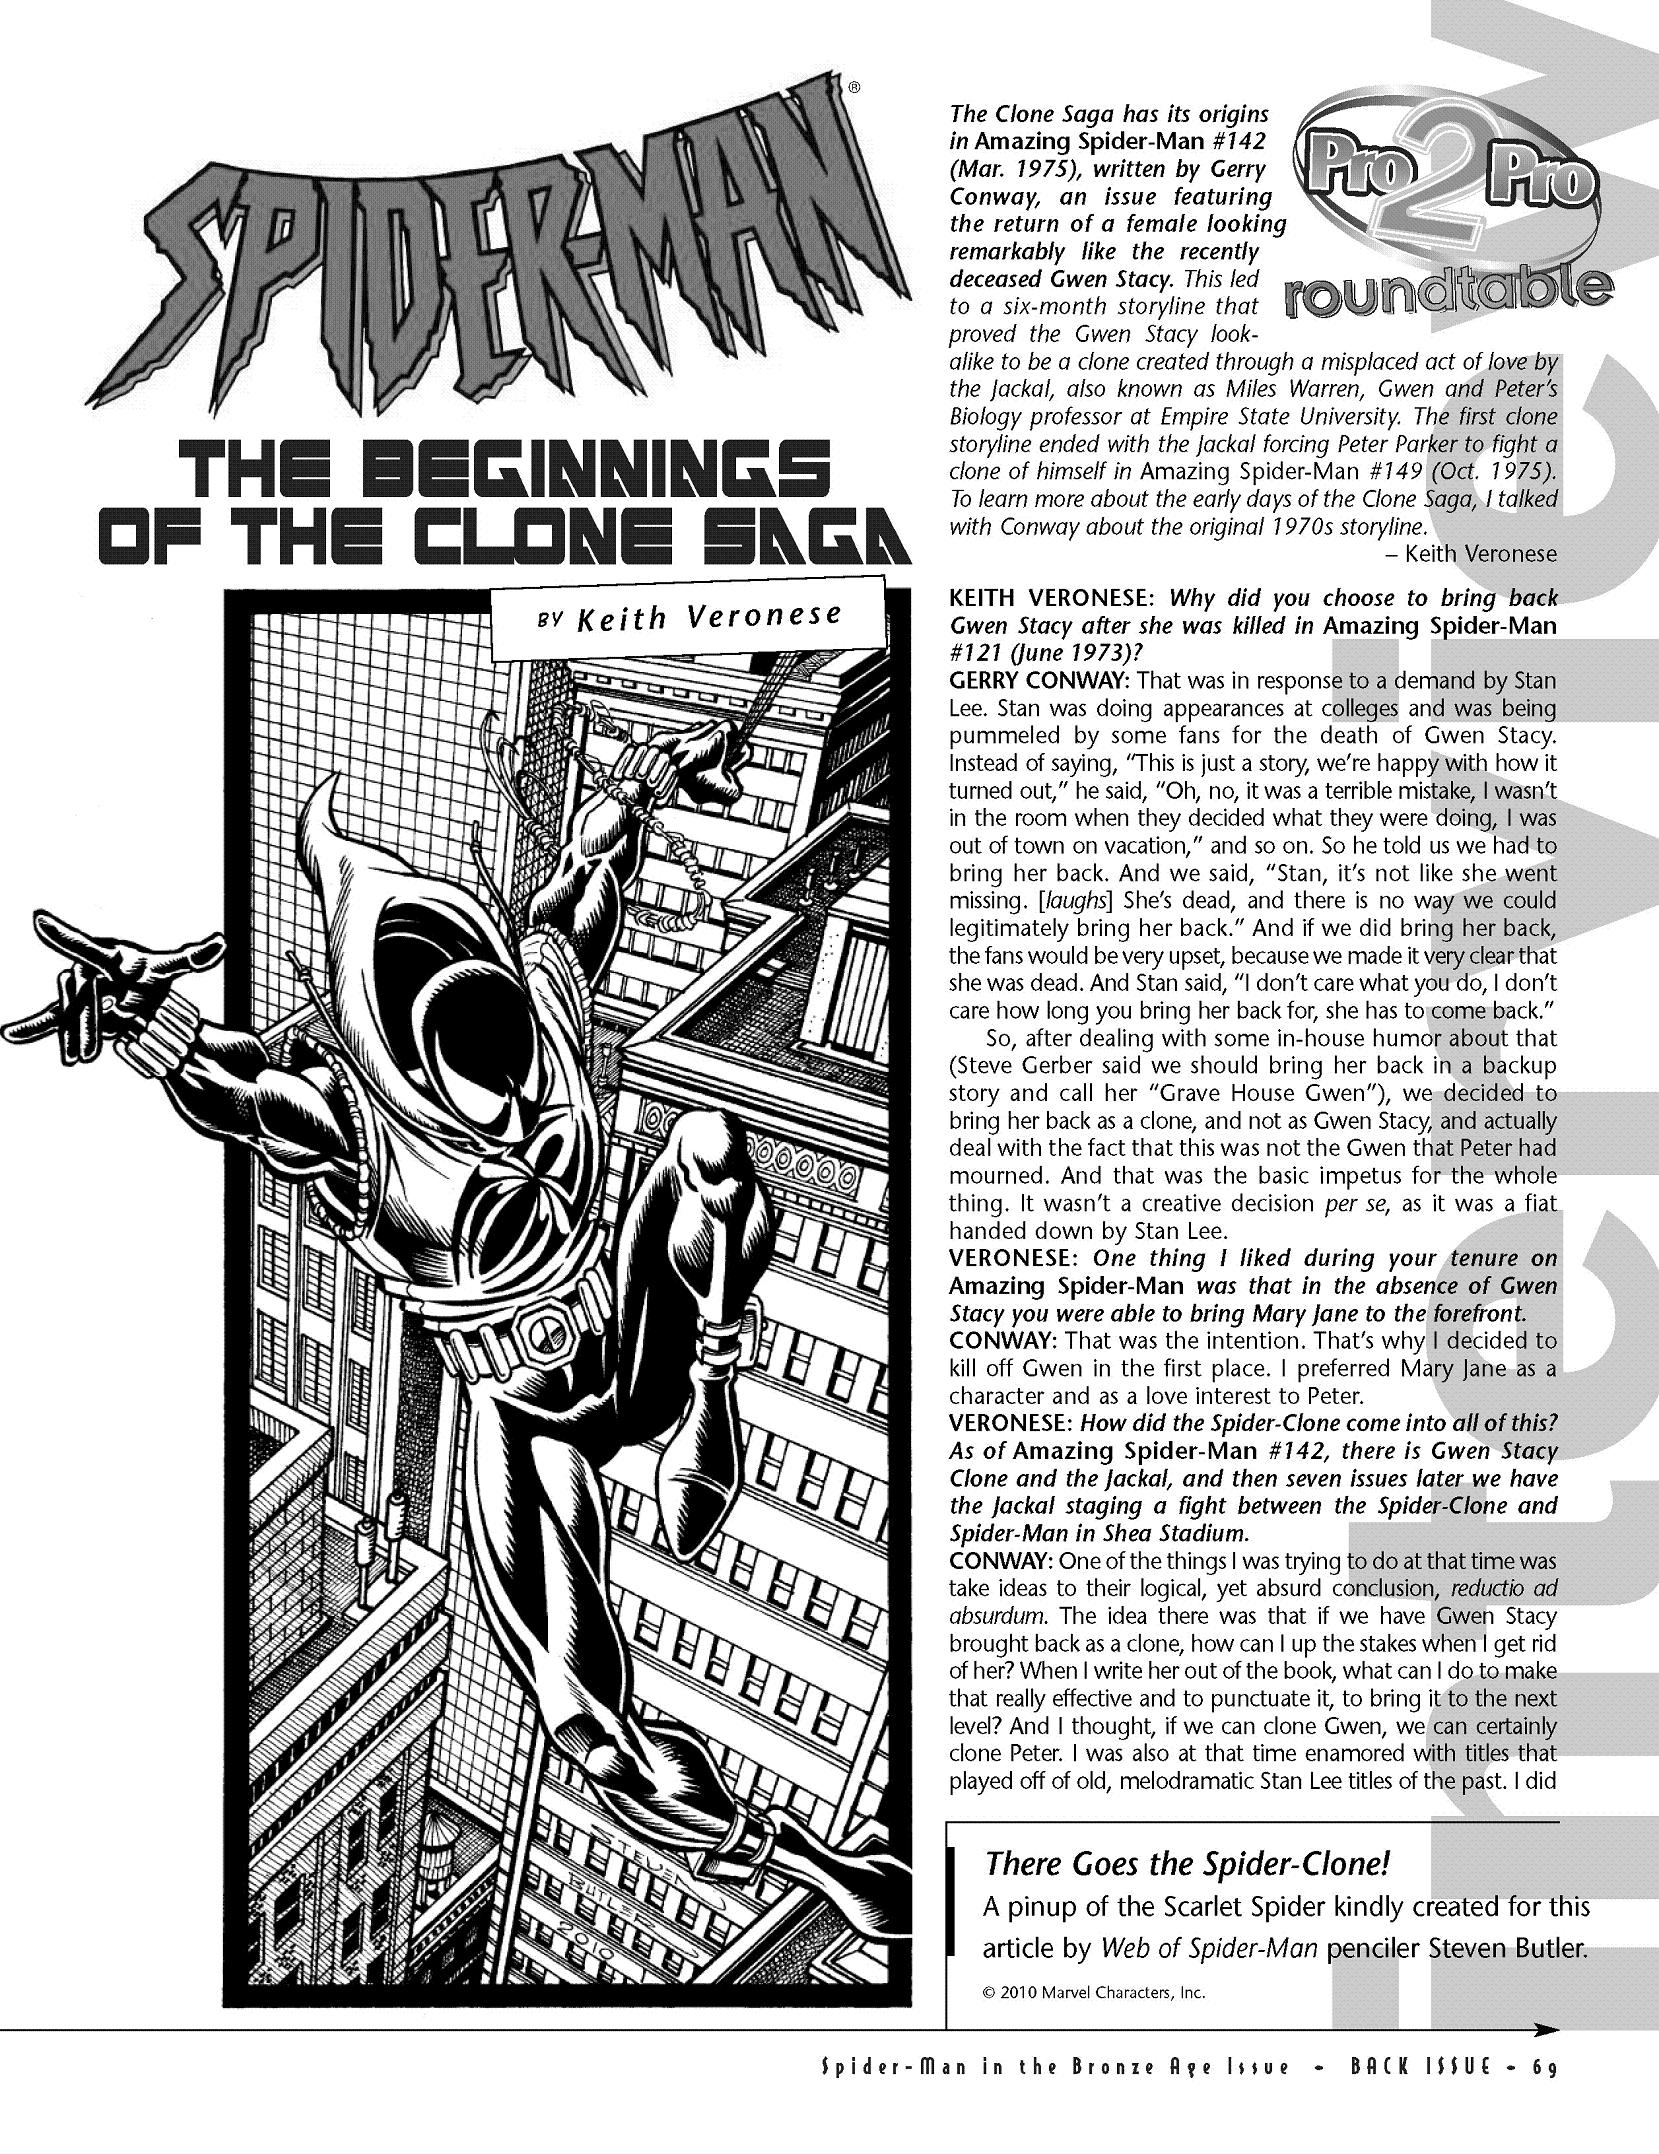 Read online Back Issue comic -  Issue #44 - 70